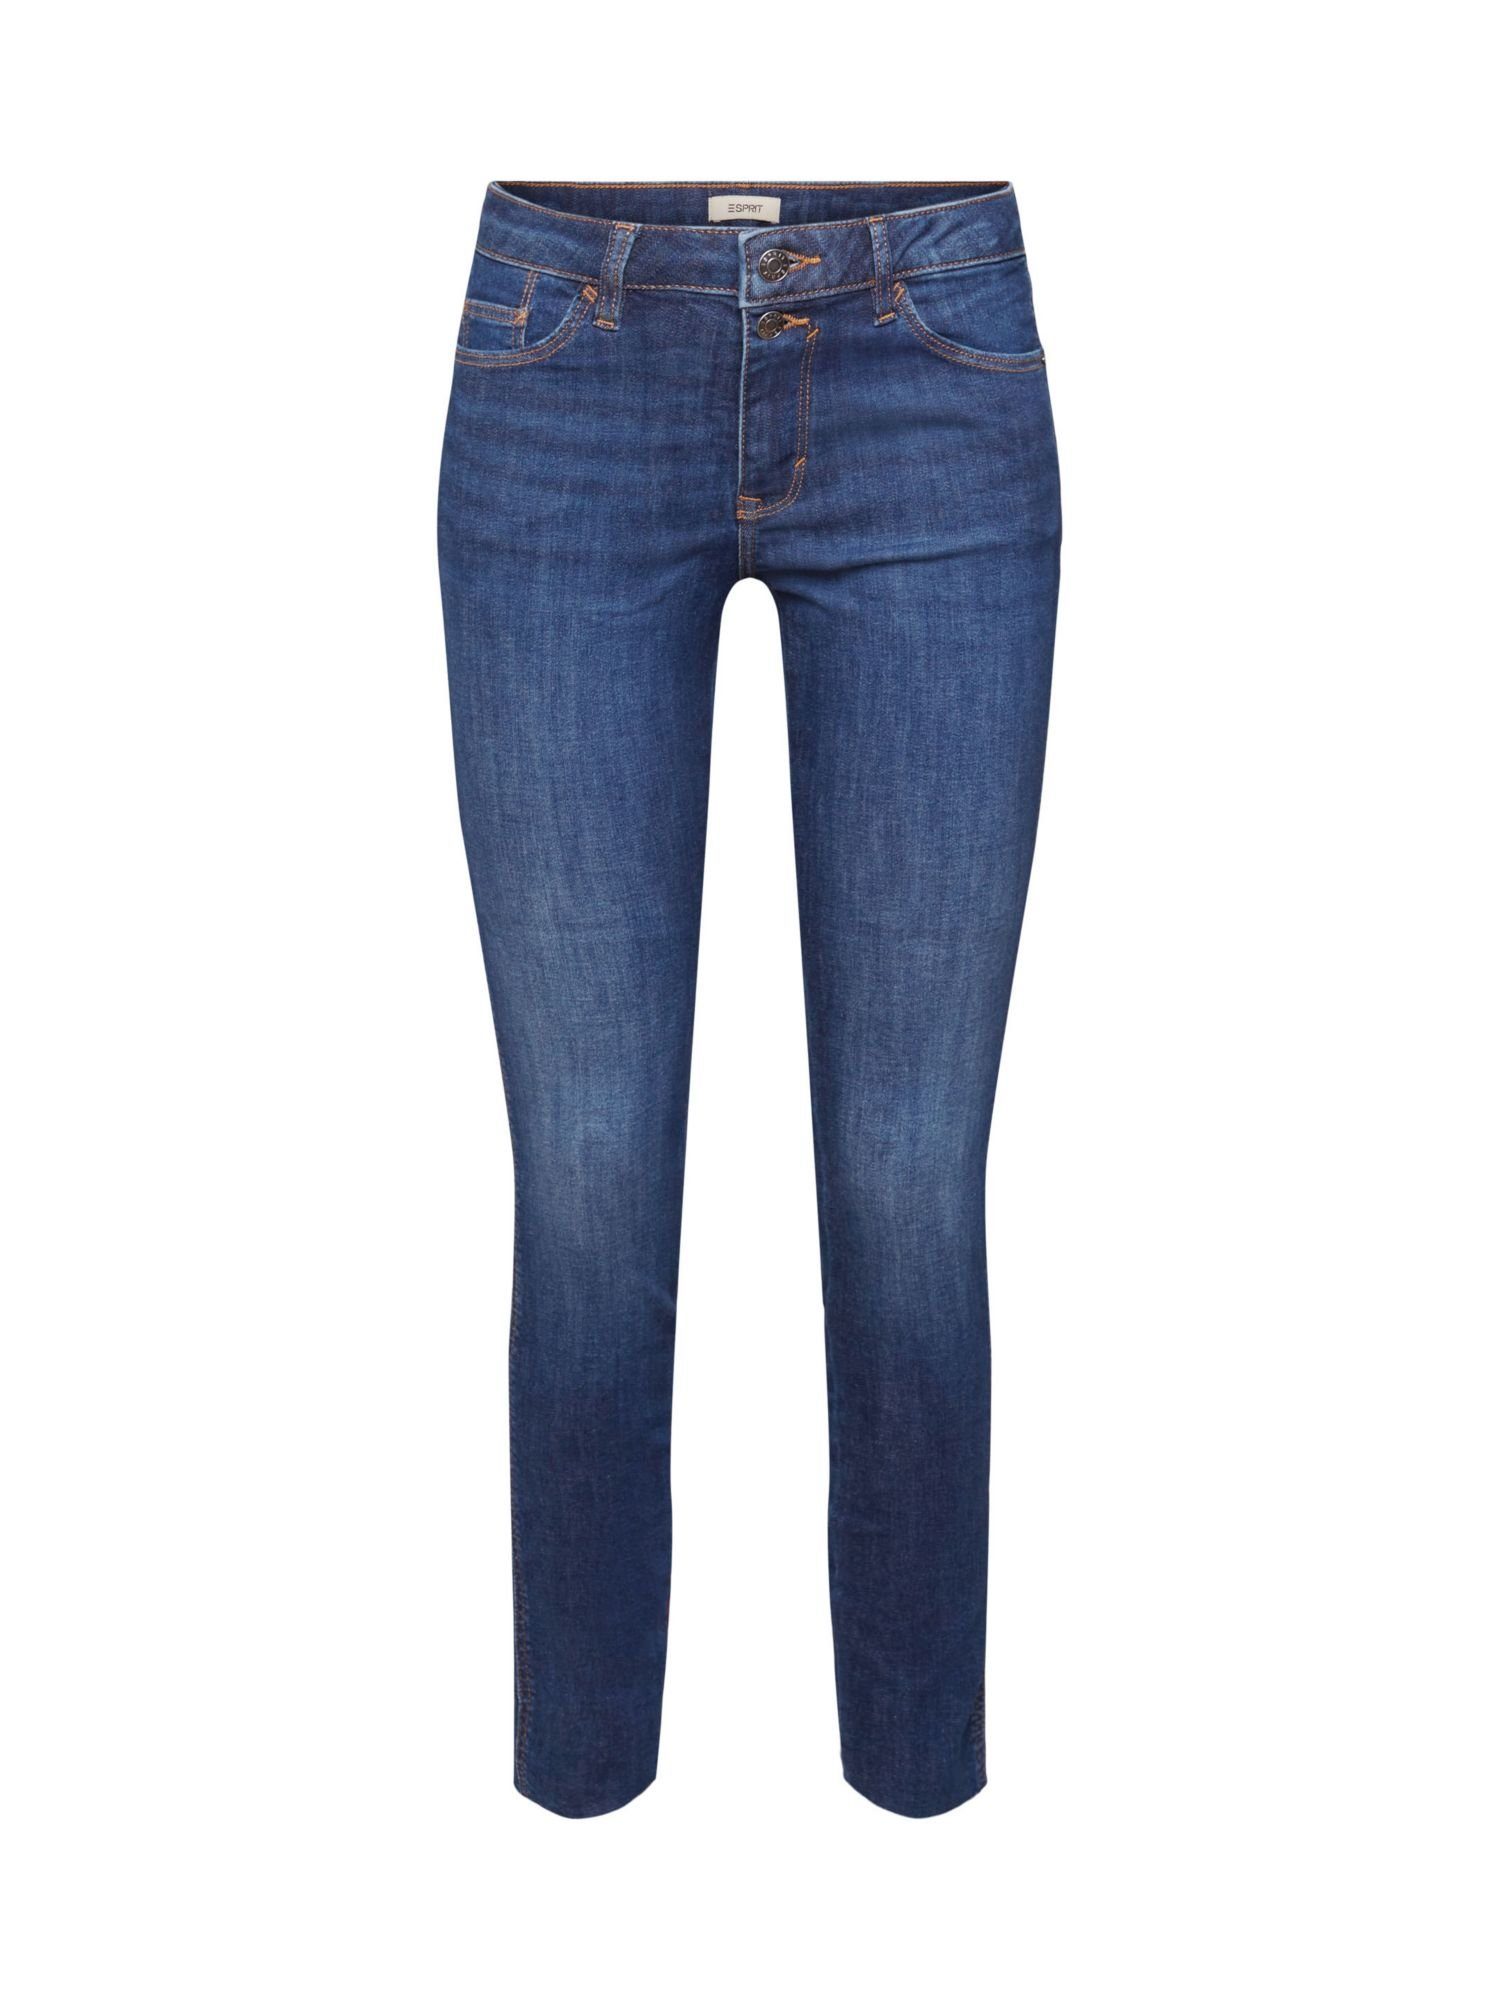 Esprit Stretch-Jeans Stretchige High-Rise-Jeans im Skinny Fit BLUE LIGHT WASHED